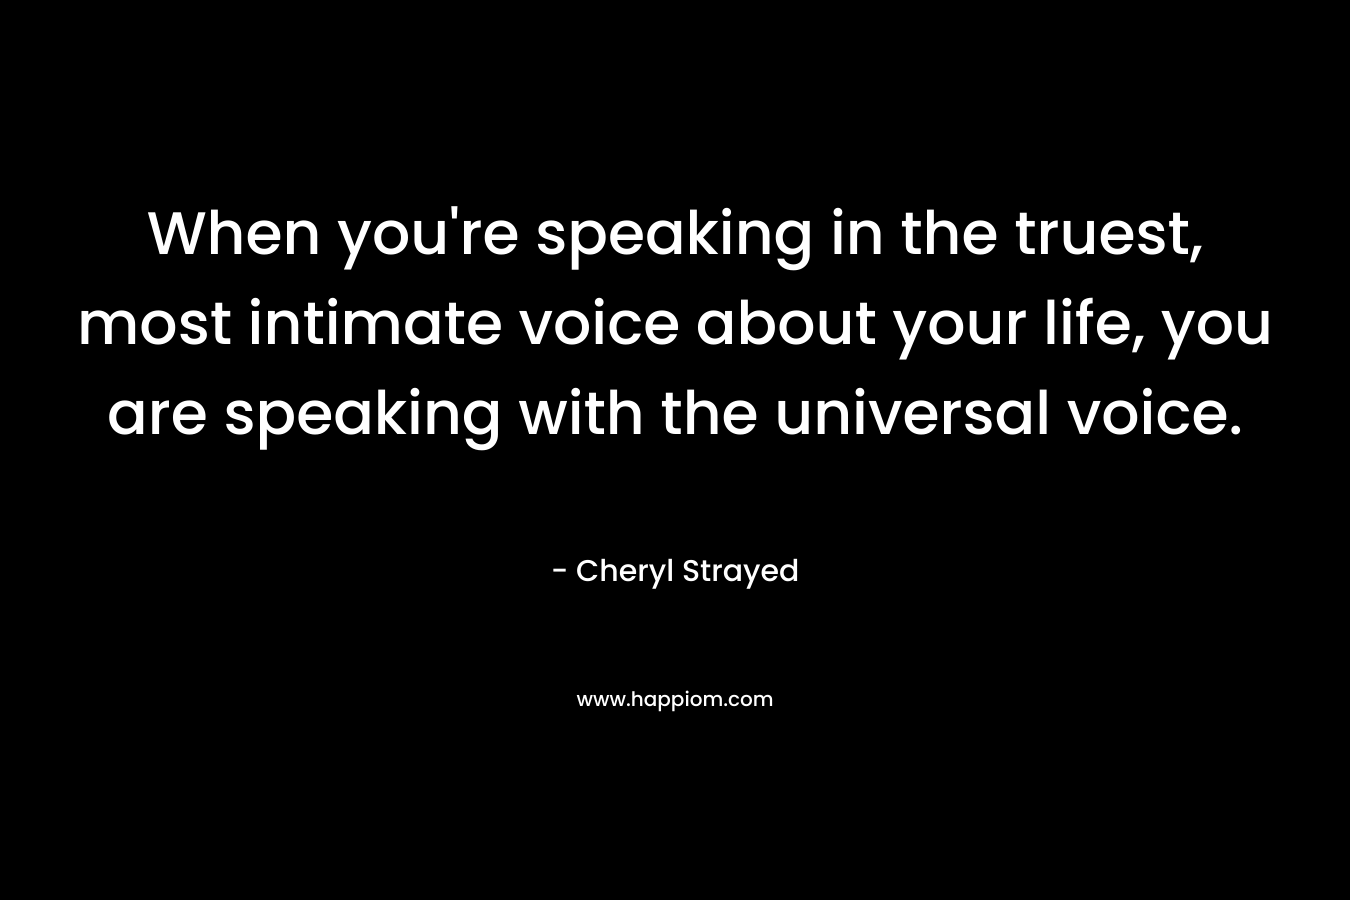 When you’re speaking in the truest, most intimate voice about your life, you are speaking with the universal voice. – Cheryl Strayed